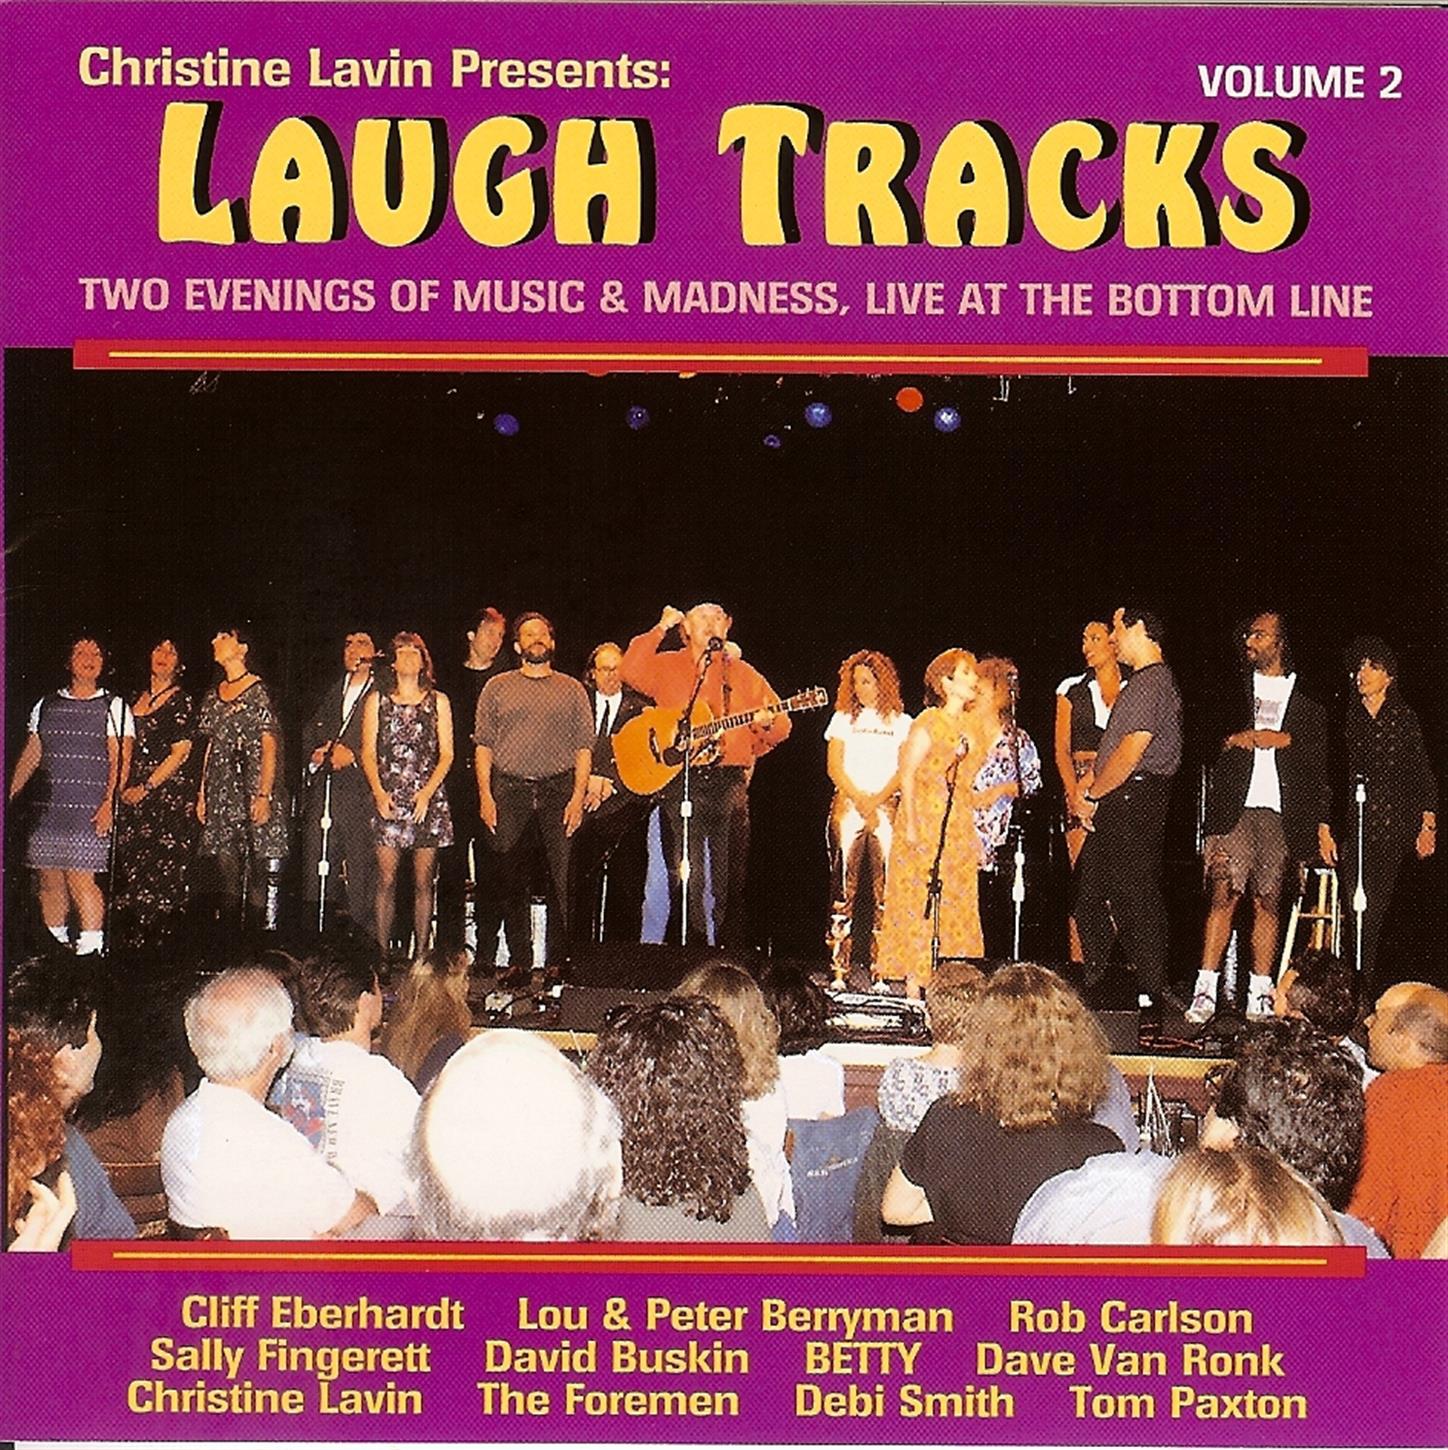 Christine Lavin Presents: Laugh Tracks - Two Evenings Of Music & Madness, Live At The Bottom Line (Volume 2)